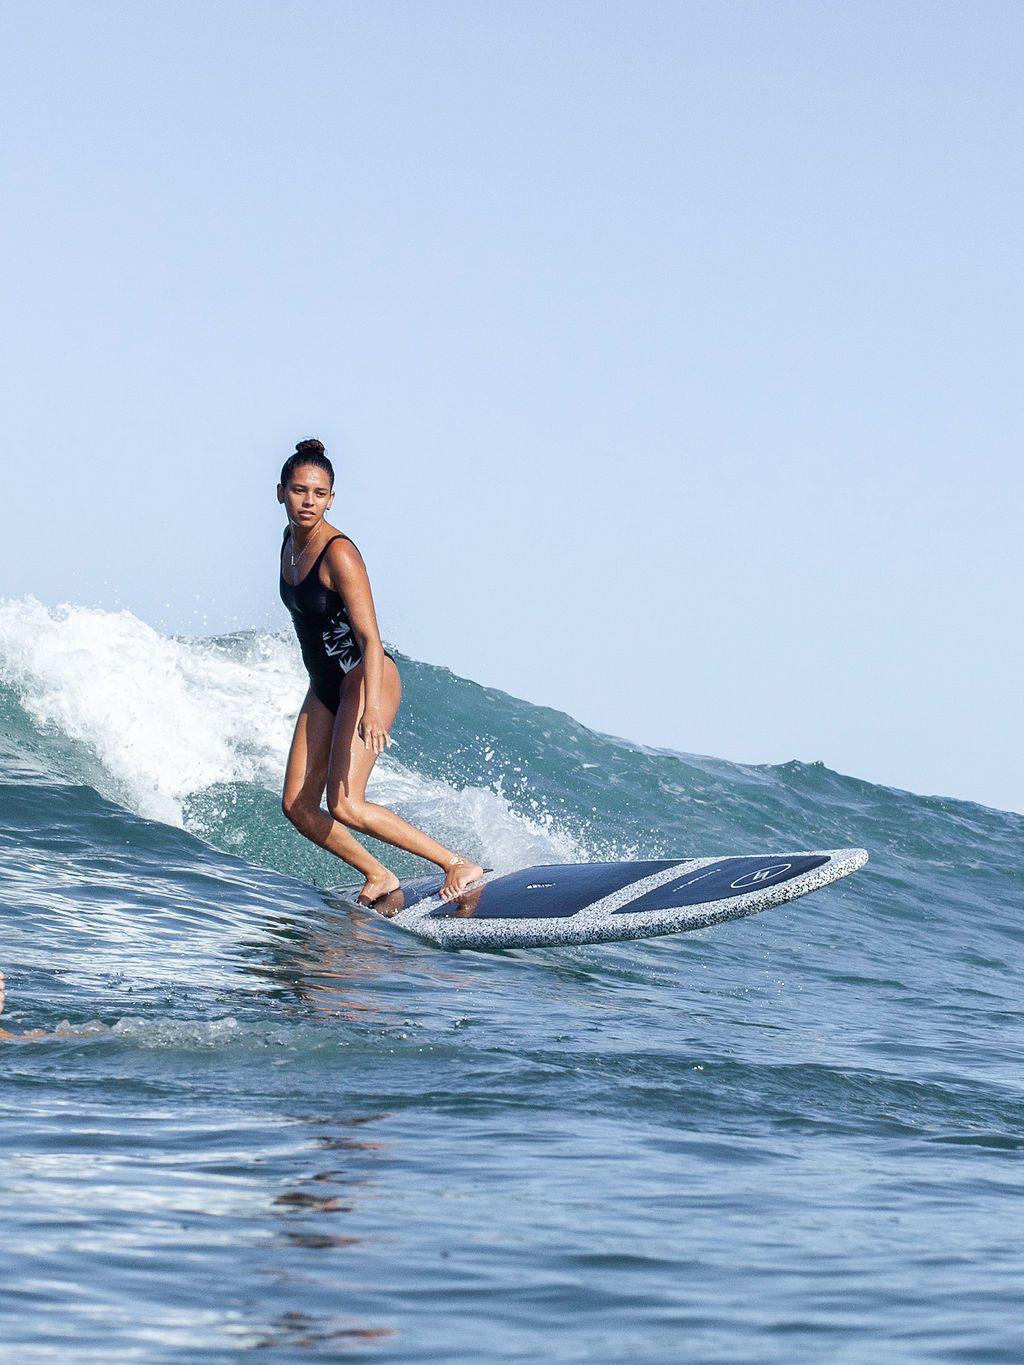 A woman surfing a wave on a speckled 9 foot 6 inch Formula Fun Foamies SanO